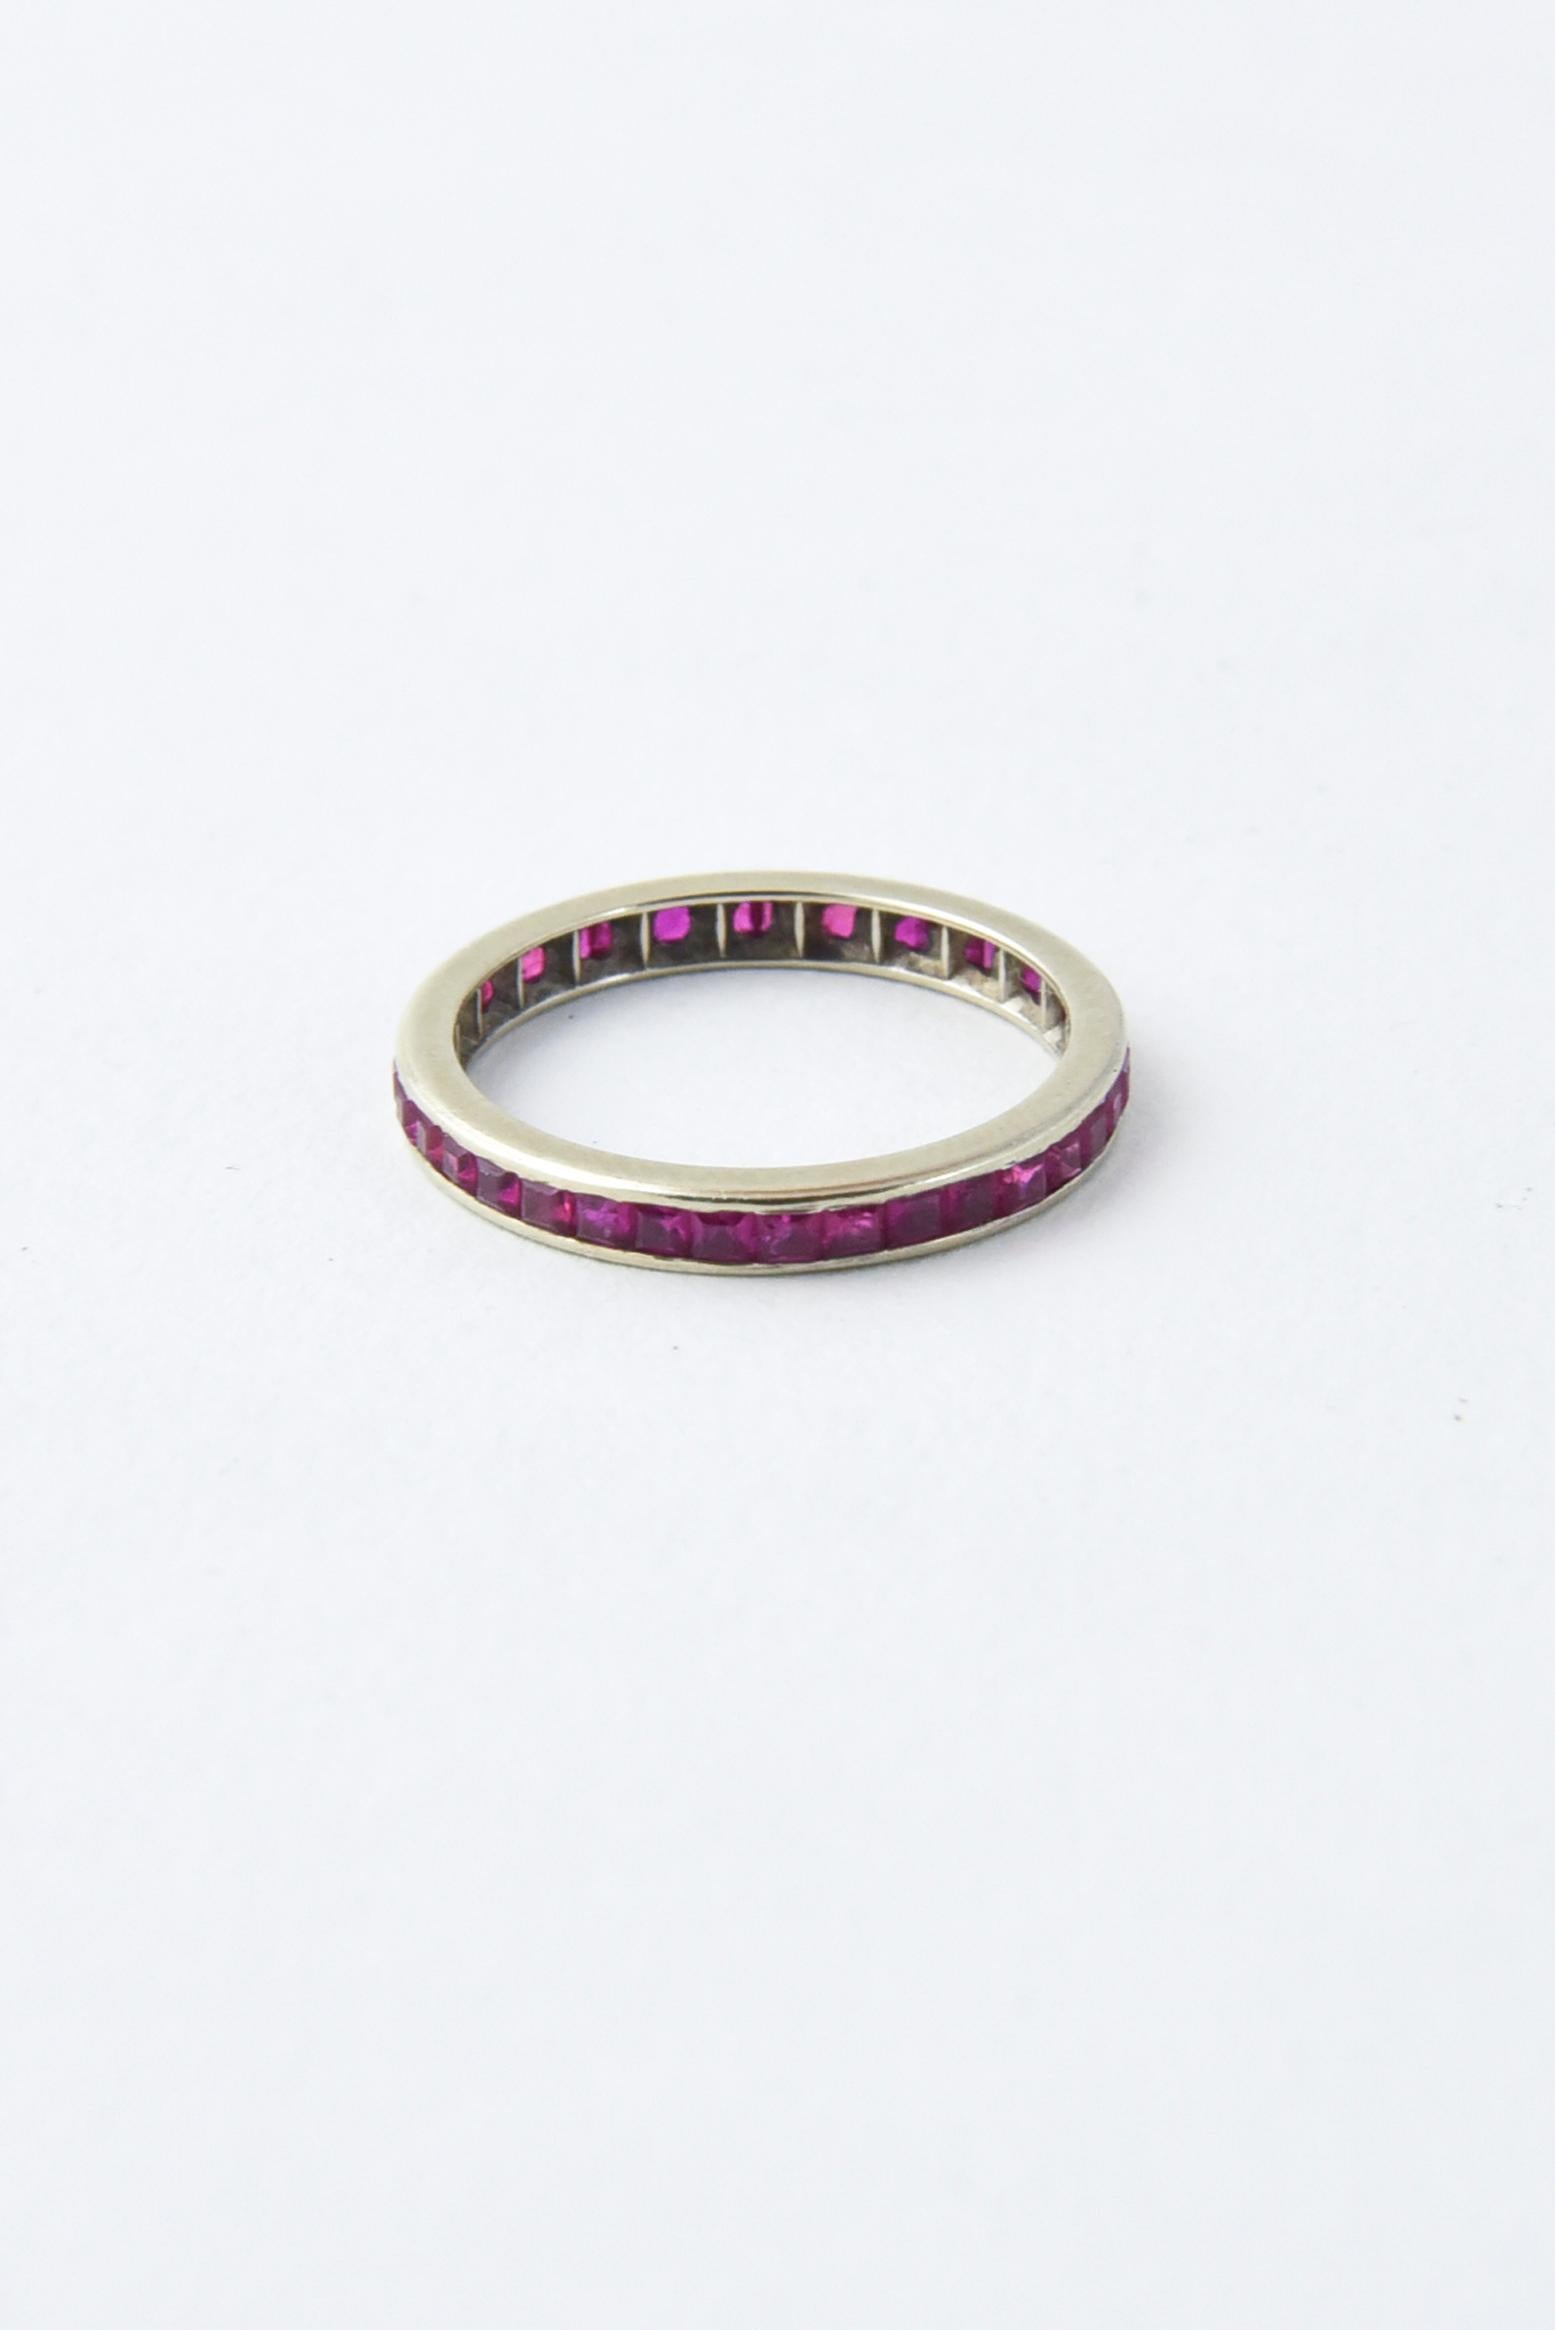 14K white gold eternity band featuring channel-set calibre square step-cut rubies. US size 7; cannot be sized. Abrasions on stones, scratches and wear to gold.
